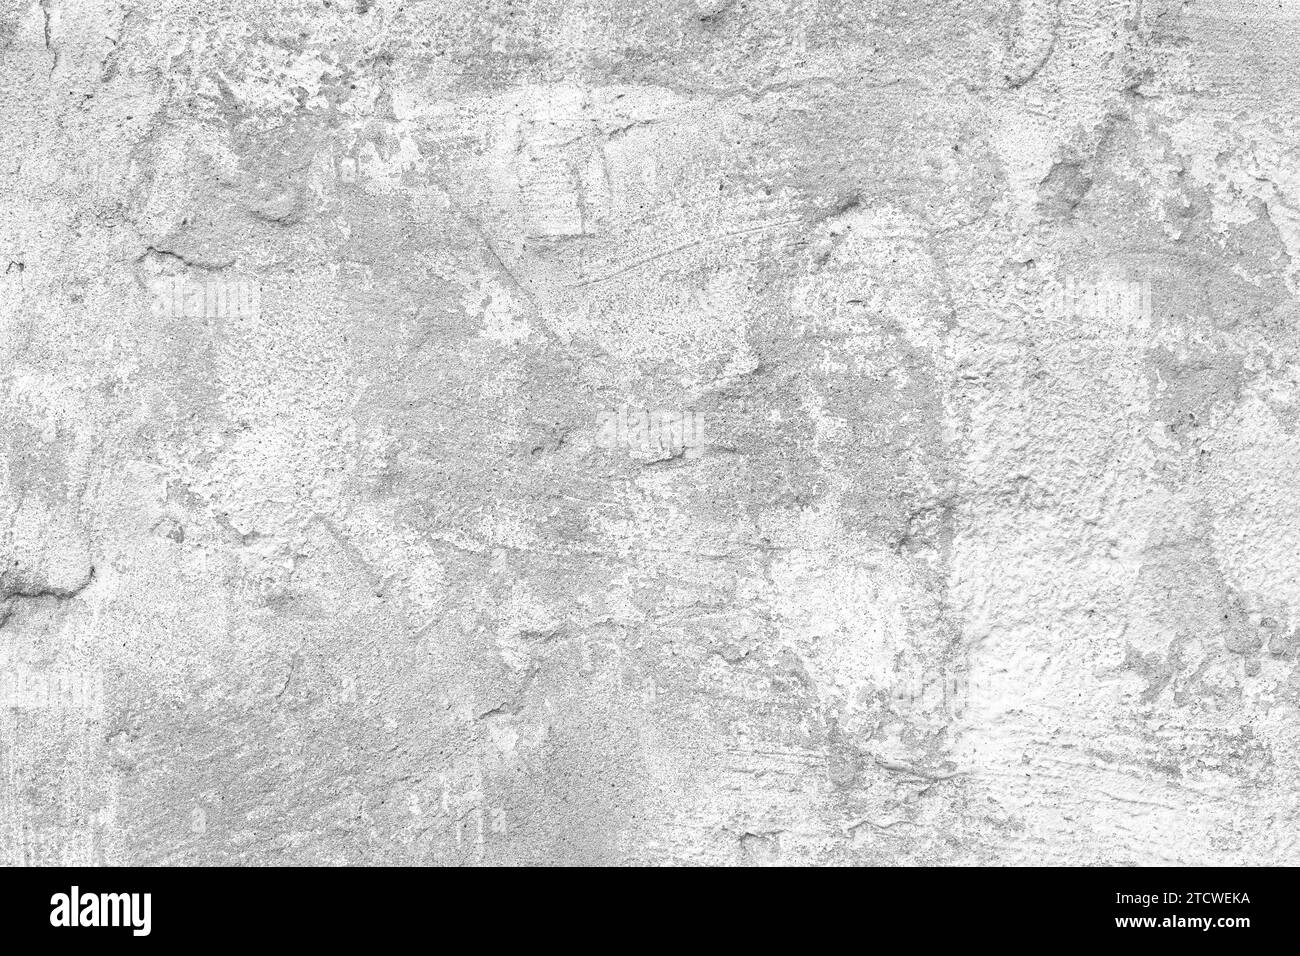 Vintage, old stucco plaster surface background, close up rough texture of gray and white mixed color painted cement, concrete wall texture. Wallpaper, Stock Photo